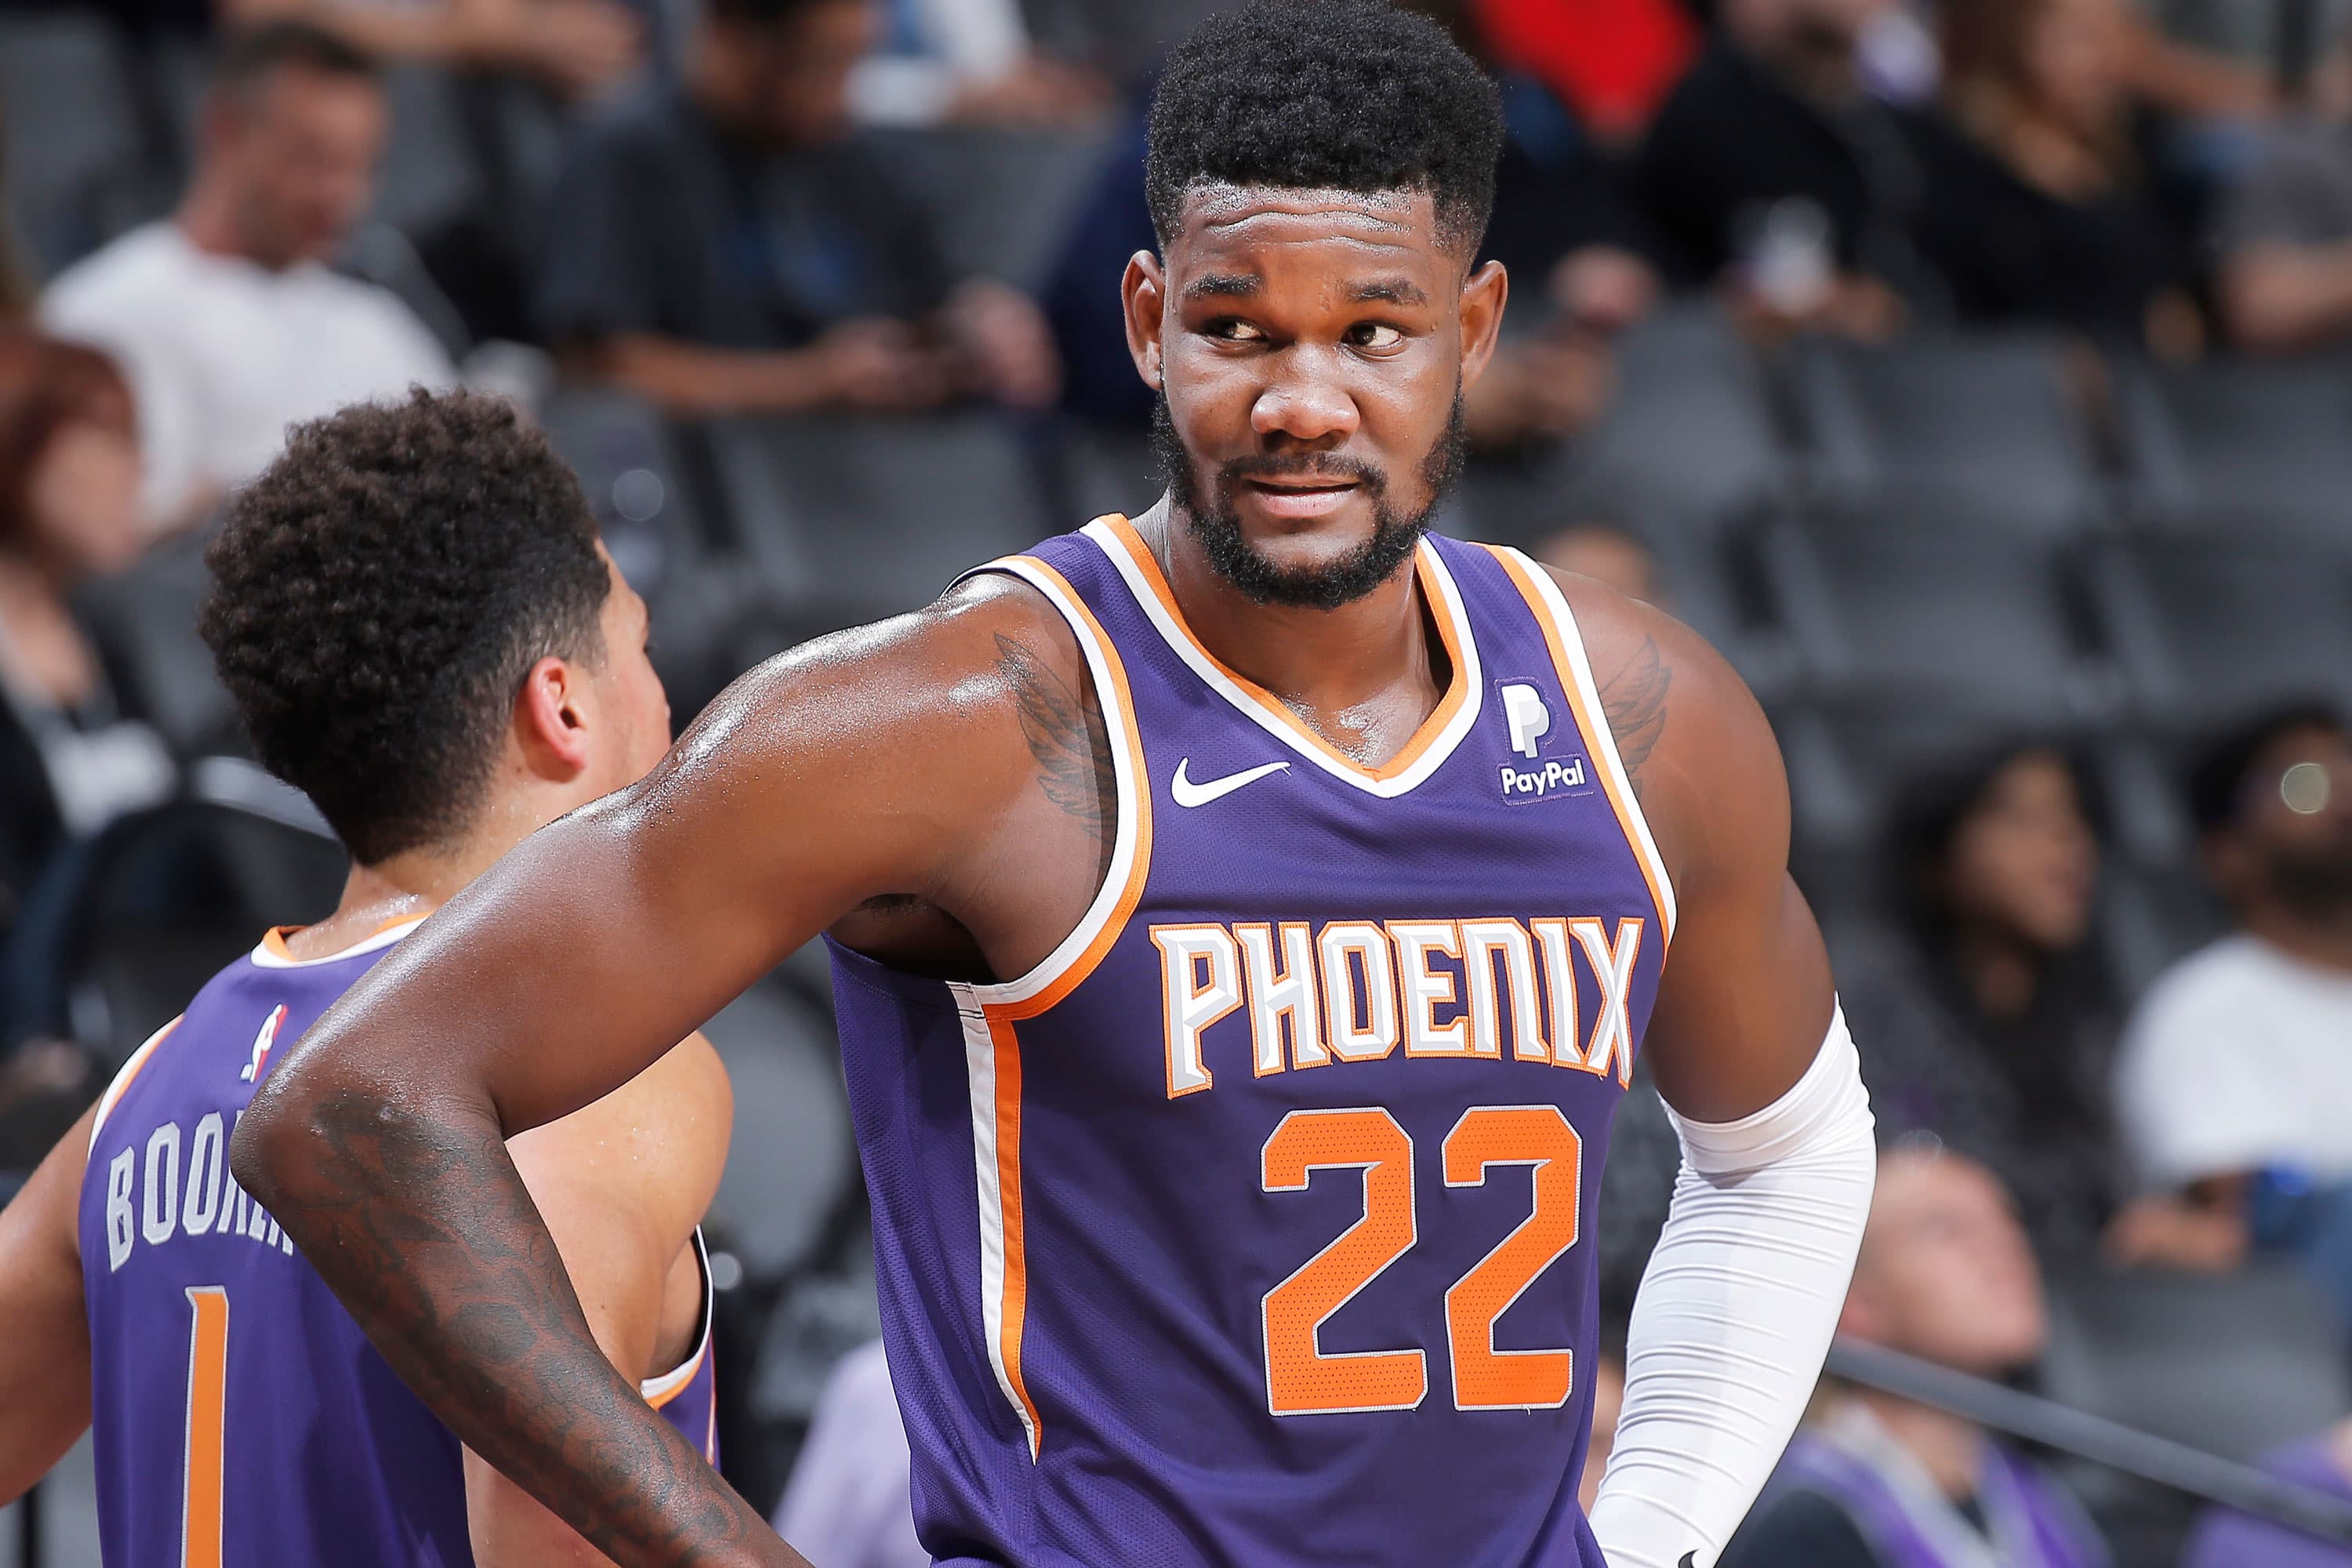 Deandre Ayton with another monster game to lead the Phoenix Suns